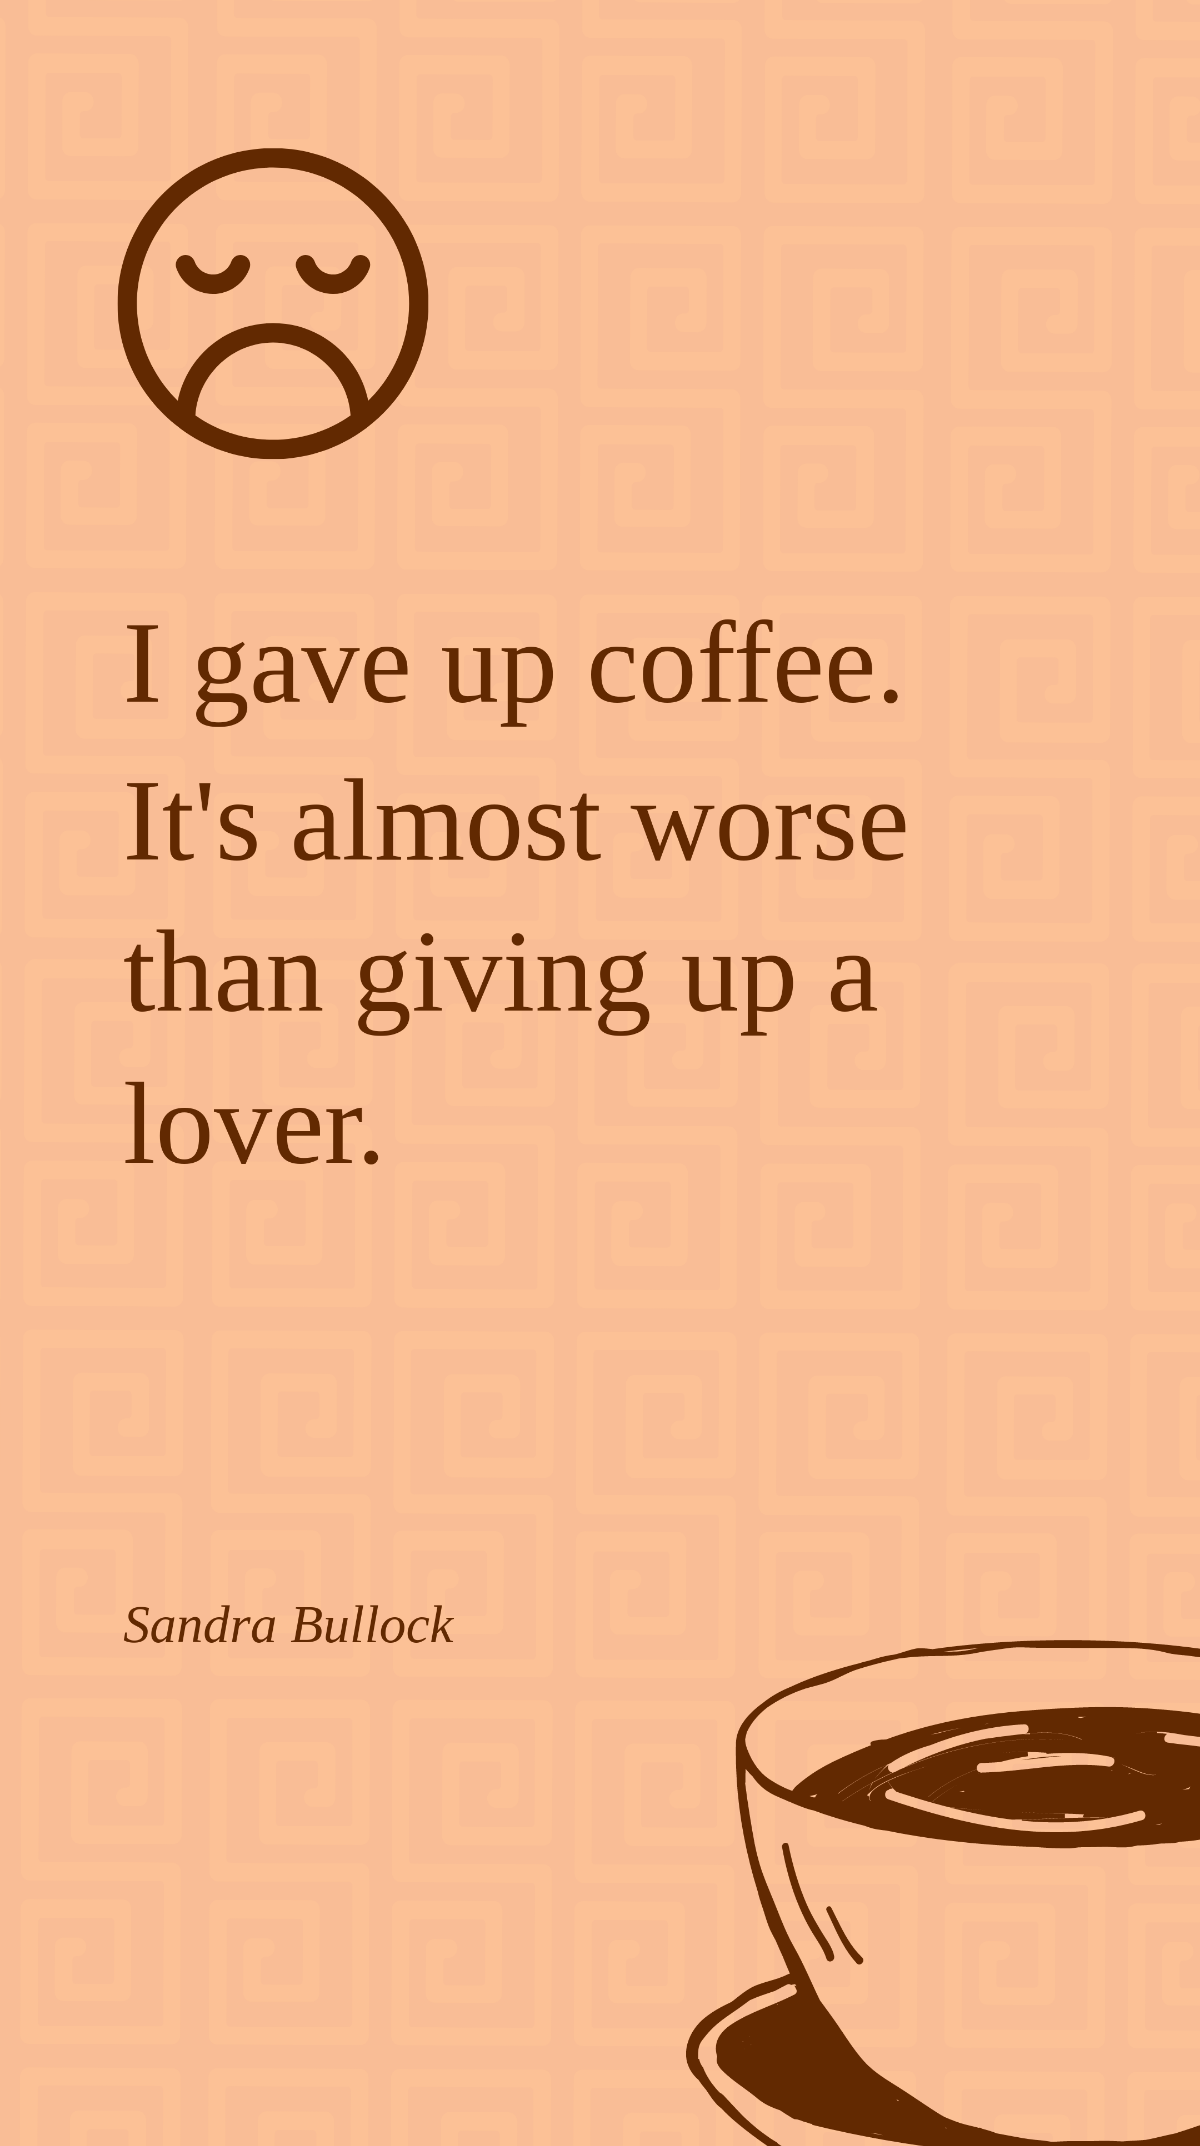 Free Sandra Bullock - I gave up coffee. It's almost worse than giving up a lover. Template